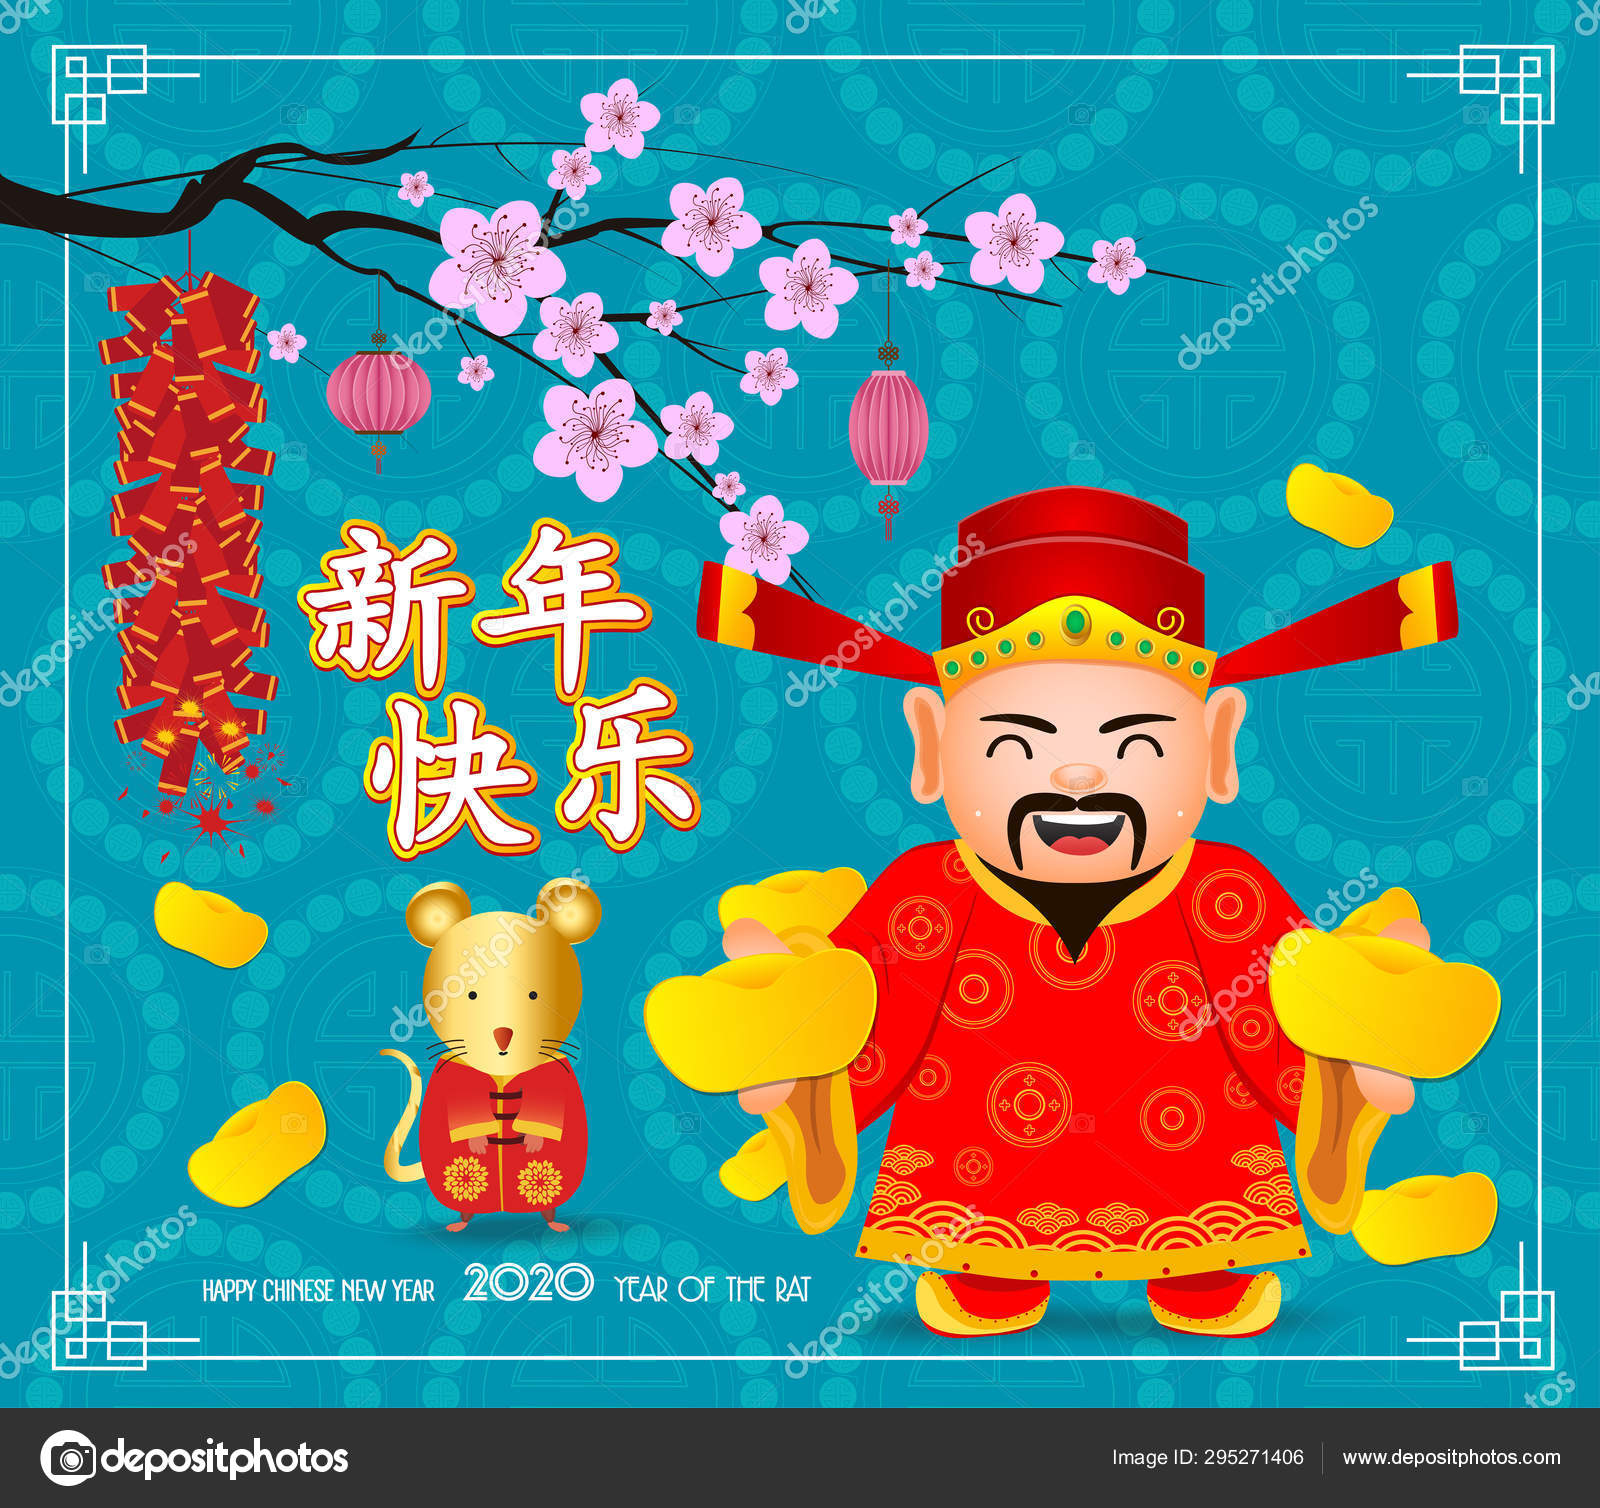 Chinese New Year 2020 Poster Design With Chinese God Of Wealth Translation Chinese New Year Vector Image By C Ngocdai86 Vector Stock 295271406